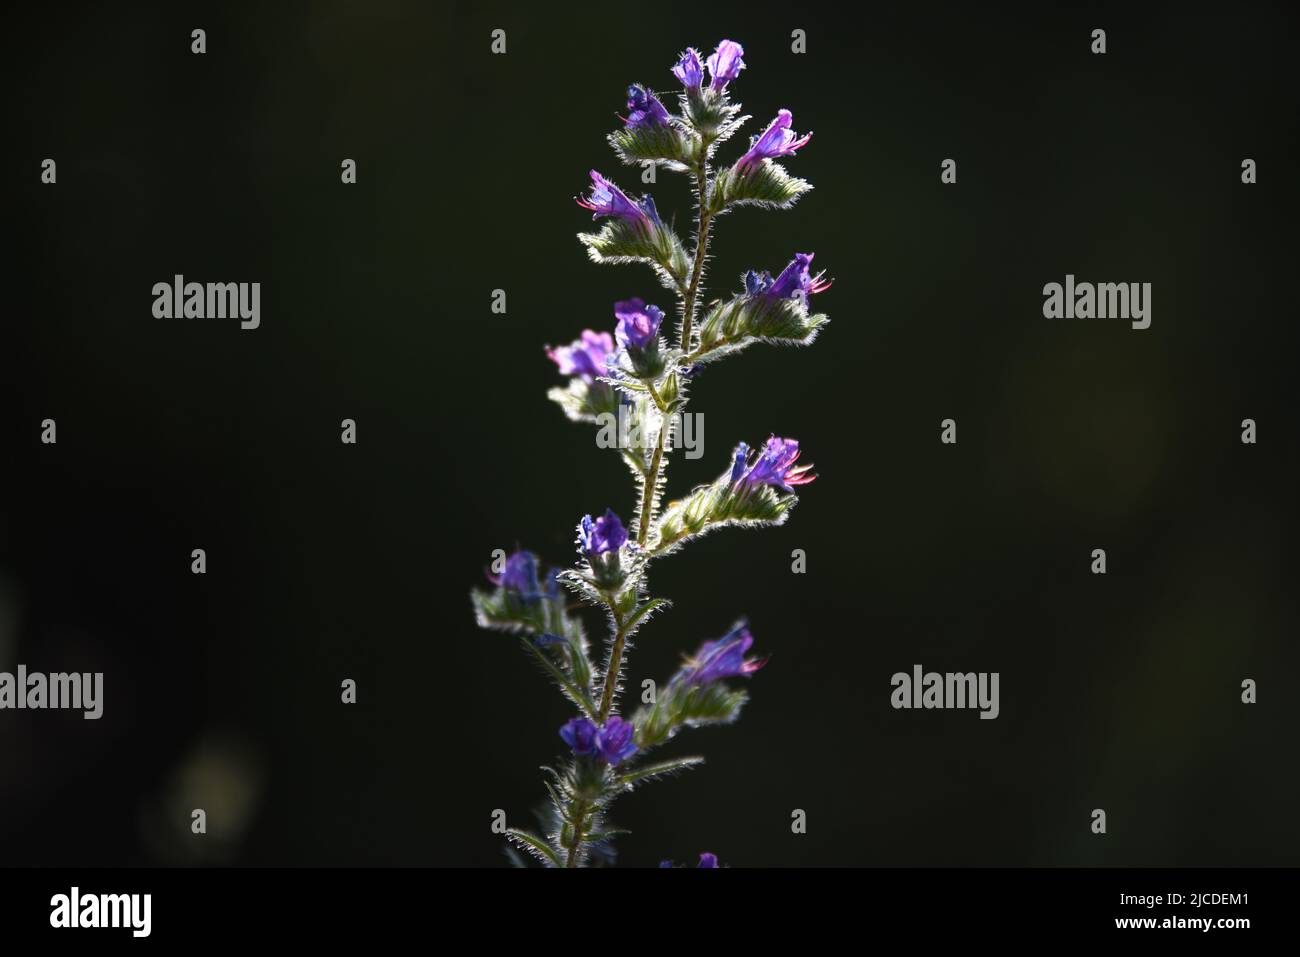 May 26, 2022, AlmazÃn, Spain: A blueweed (Echium vulgare) is seen during spring. According to AEMET, the Spanish meteorological agency, it was the fourth driest spring since 1961, and the second driest of the 21st century, only behind 2005. Precipitation in the country as a whole was 33% below normal and the average temperature was 12.5ÂºC. This temperature was 0.4ÂºC higher than the average of last decades. (Credit Image: © Jorge Sanz/SOPA Images via ZUMA Press Wire) Stock Photo